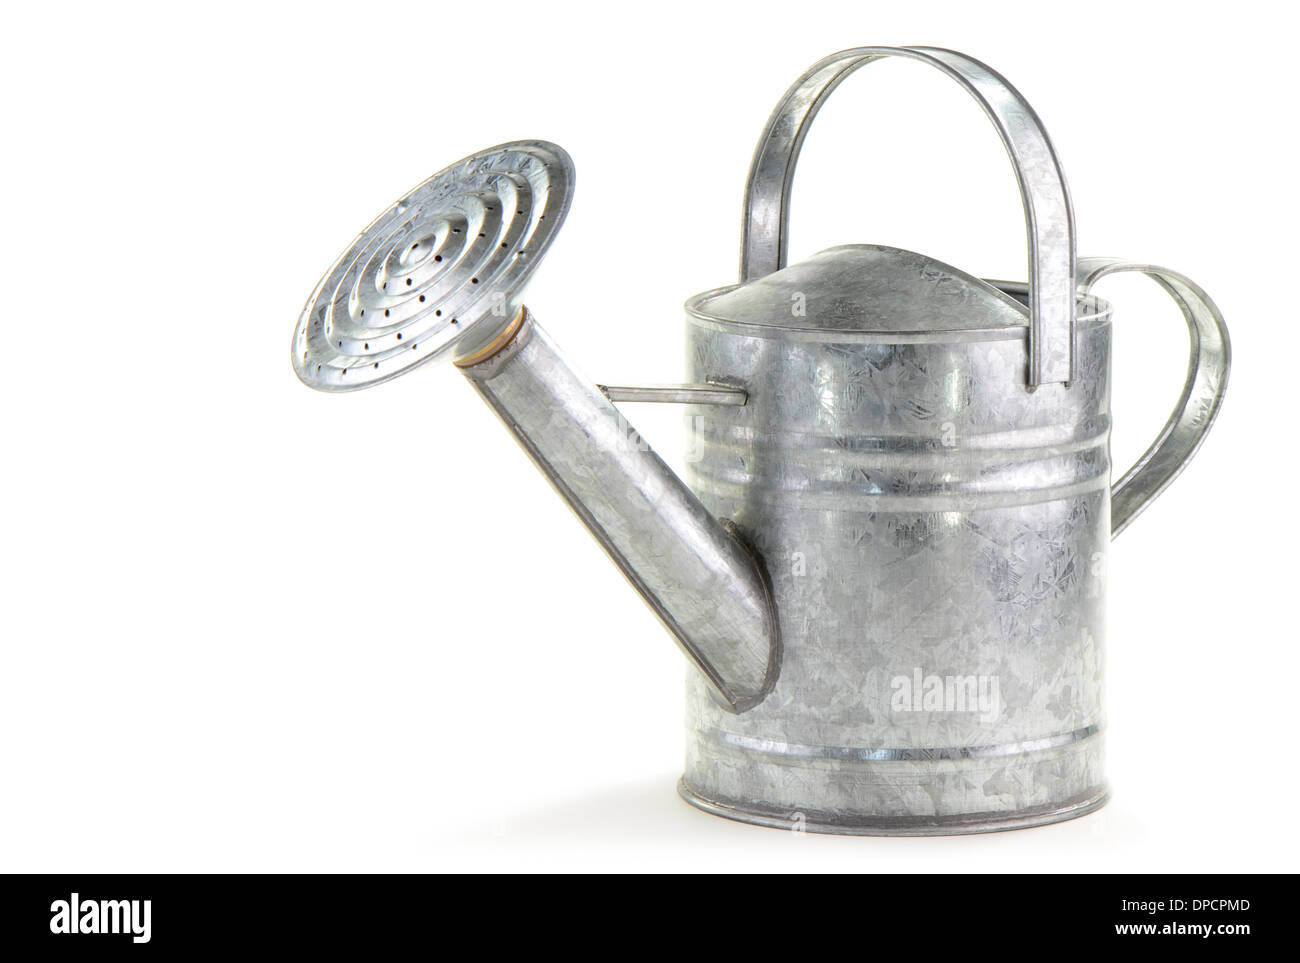 Tin watering can on white background with room for text Stock Photo